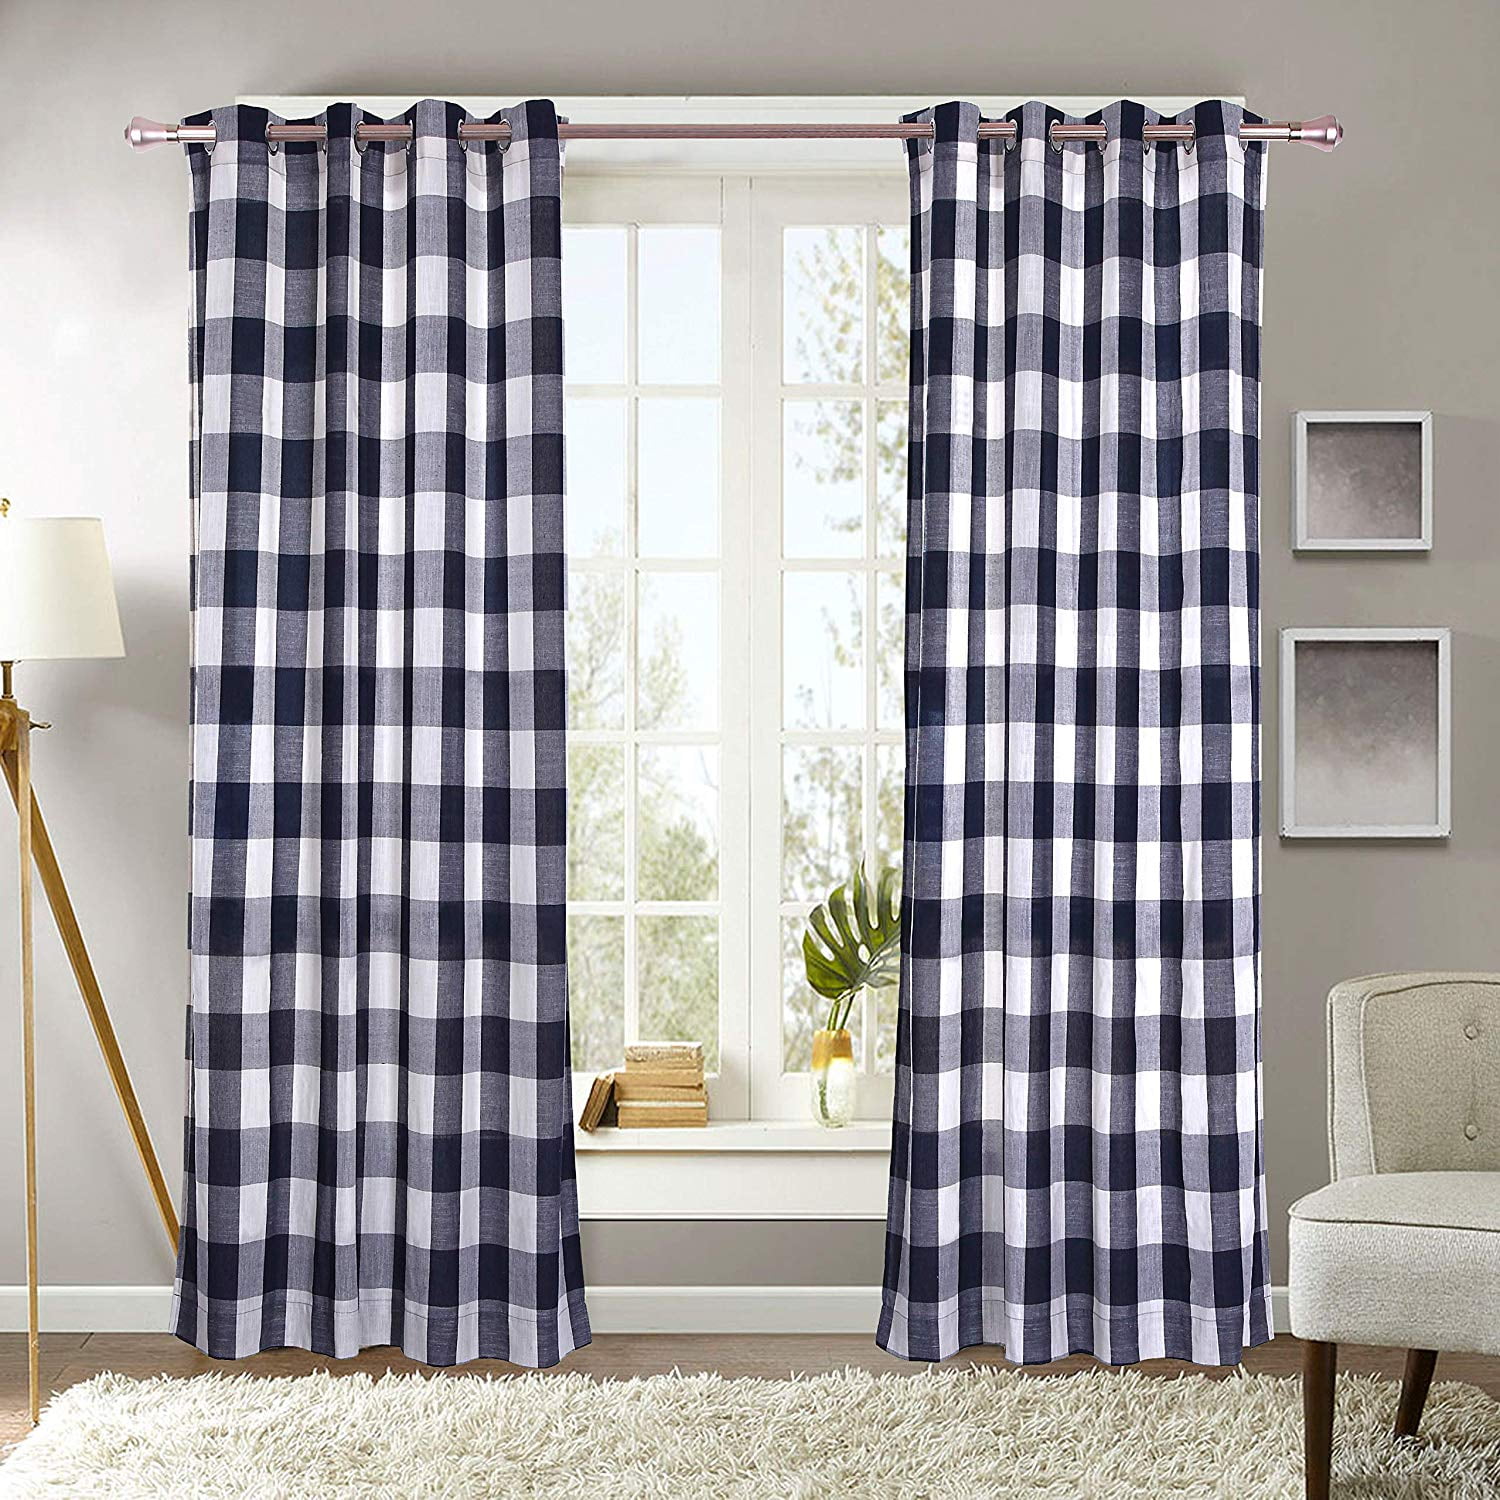 Window Curtain Panel Ds, Large Black Buffalo Check Curtains